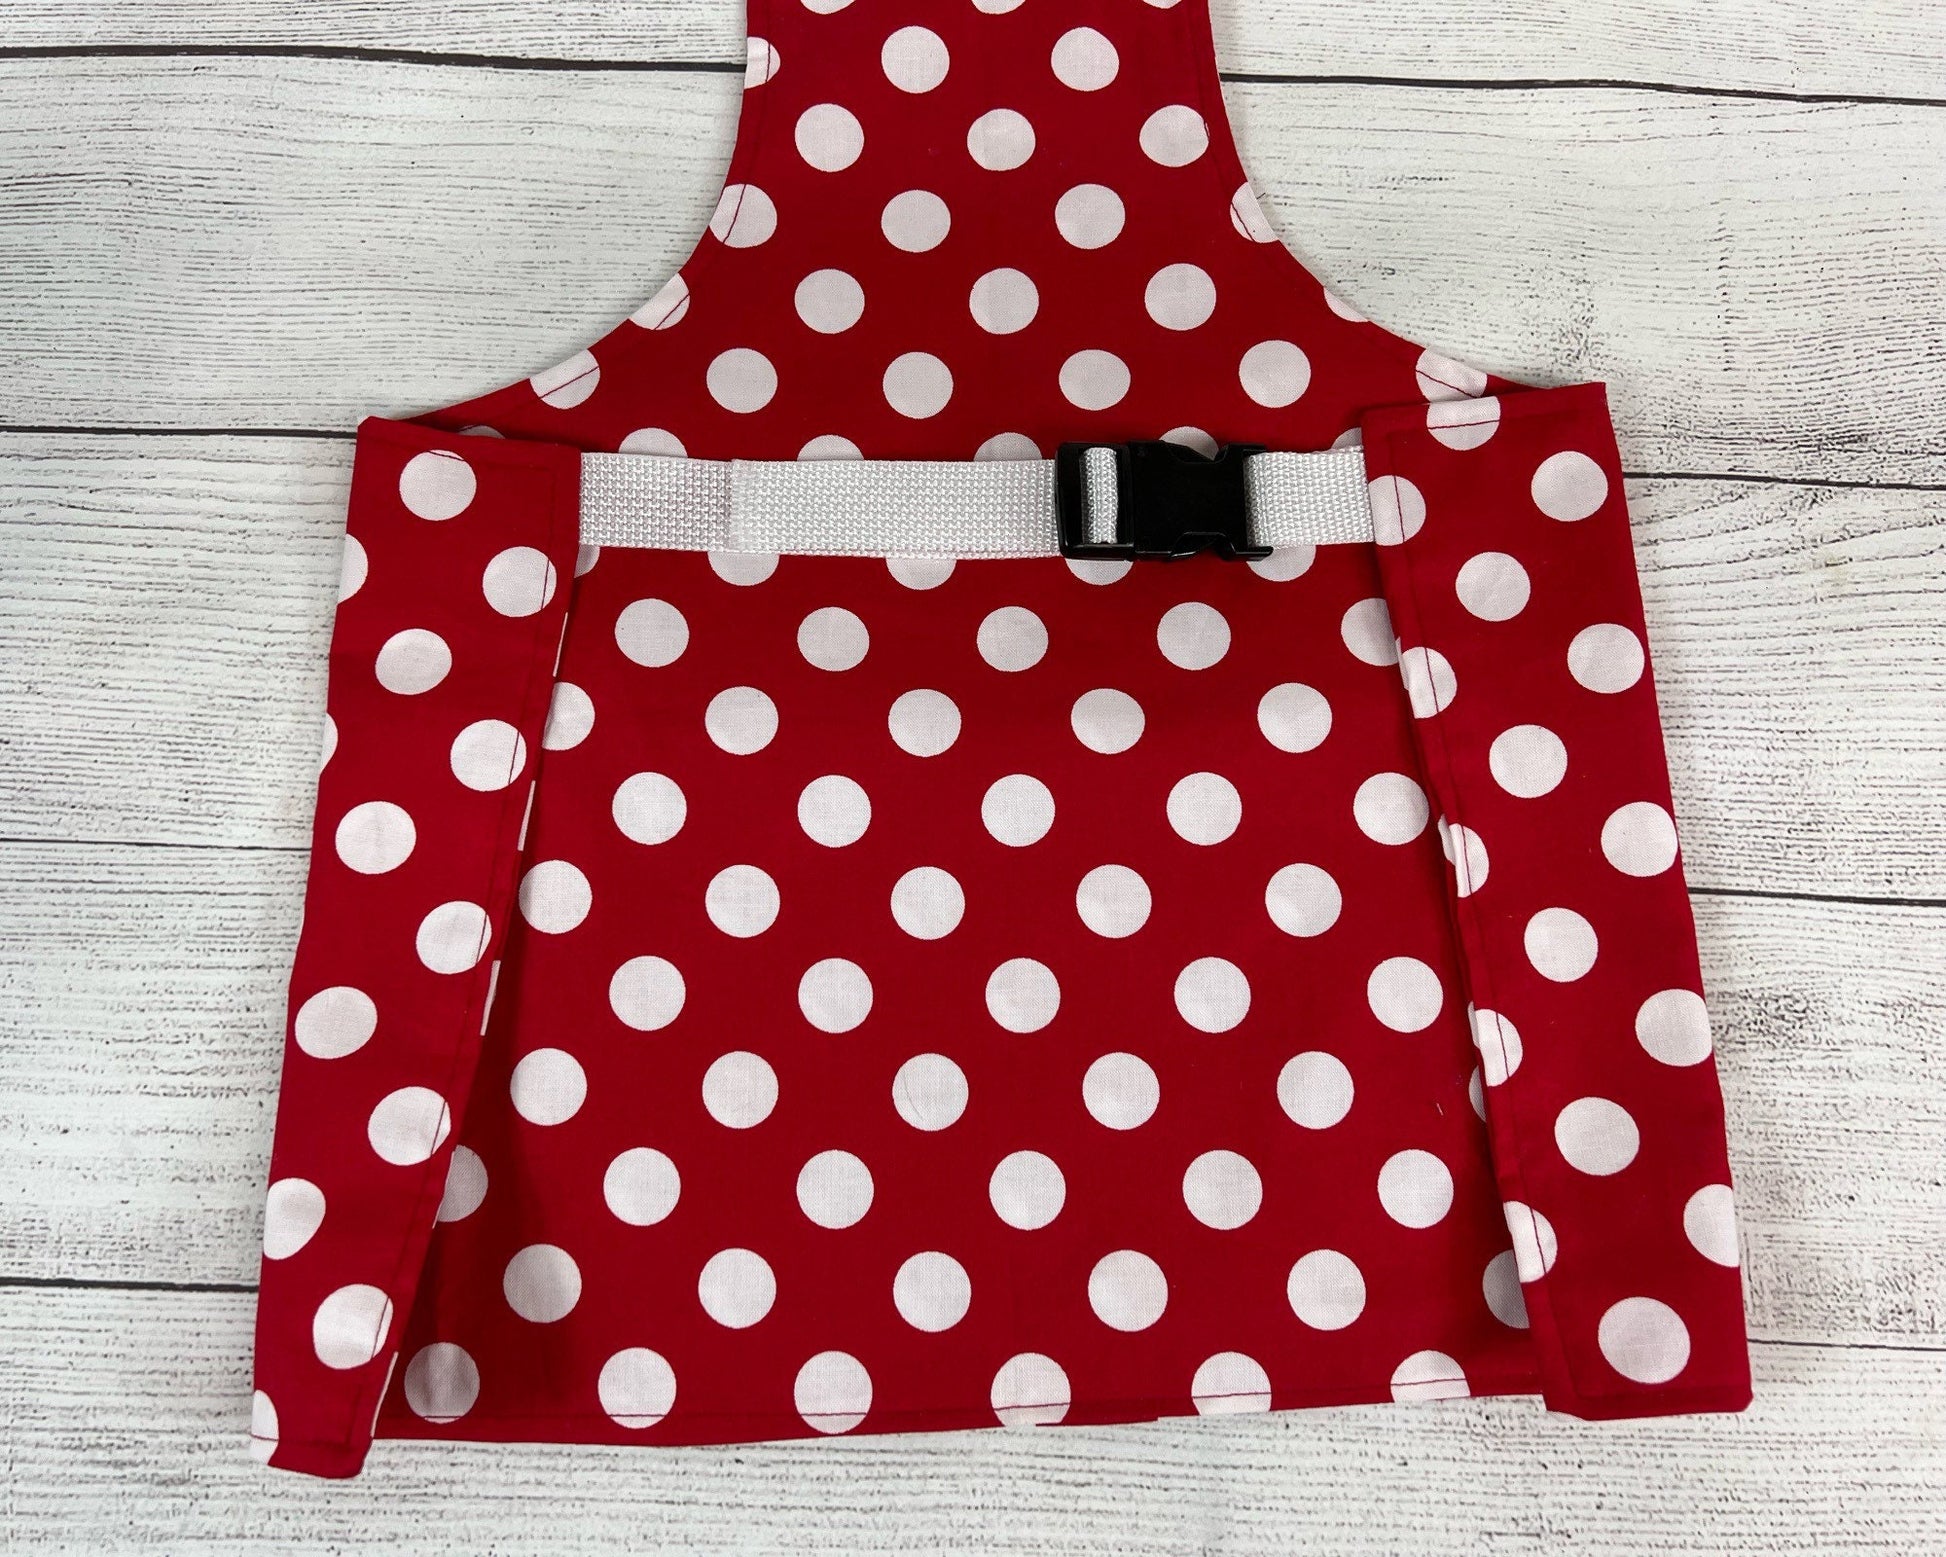 Child Apron - Kitchen - Cooking - Early Cooking Skills - Messes - Child Accessories - Polka Dot - Red and White - Small Apron